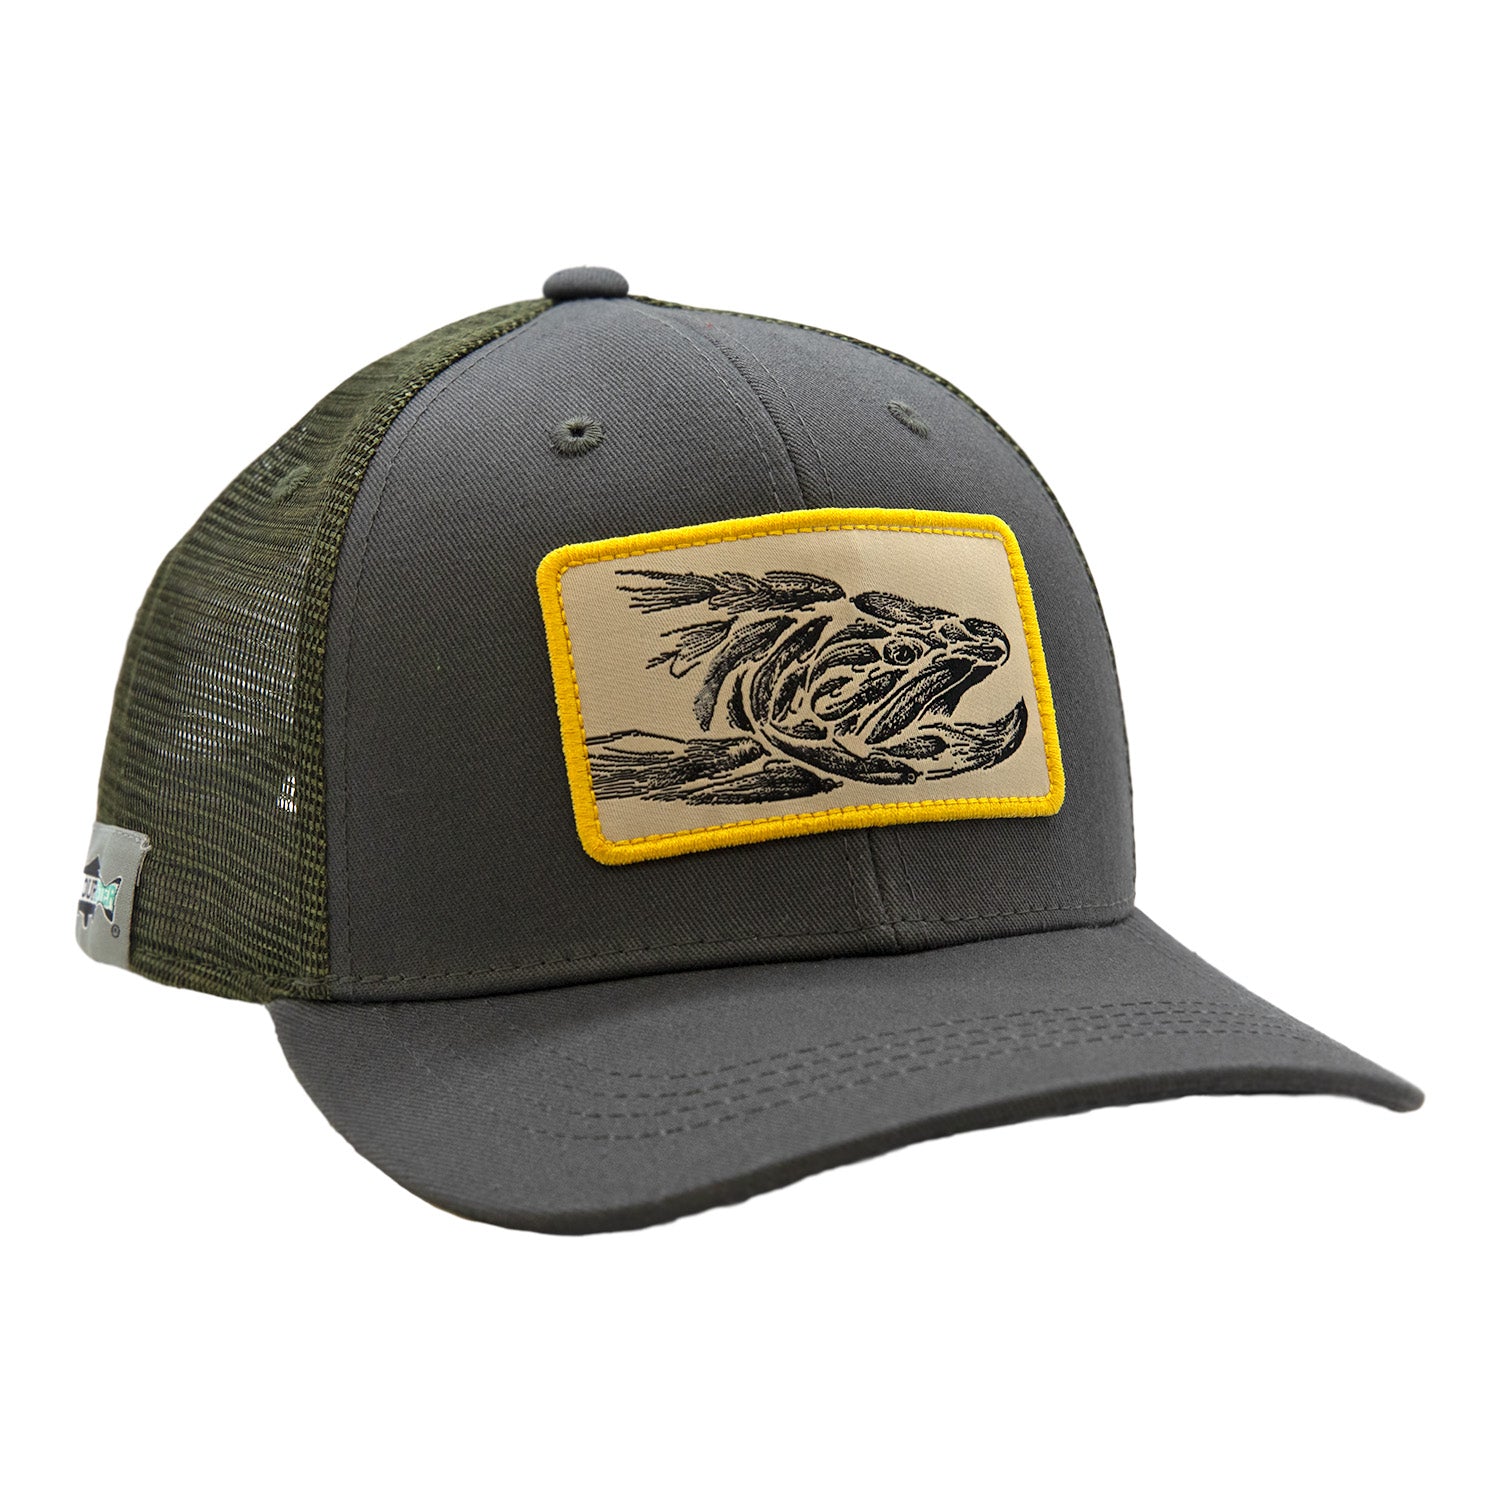 Dark gray cotton hat with a green mesh back with a patch on the fron in gray with a yellow border that shows a trout head made up of fishing flies